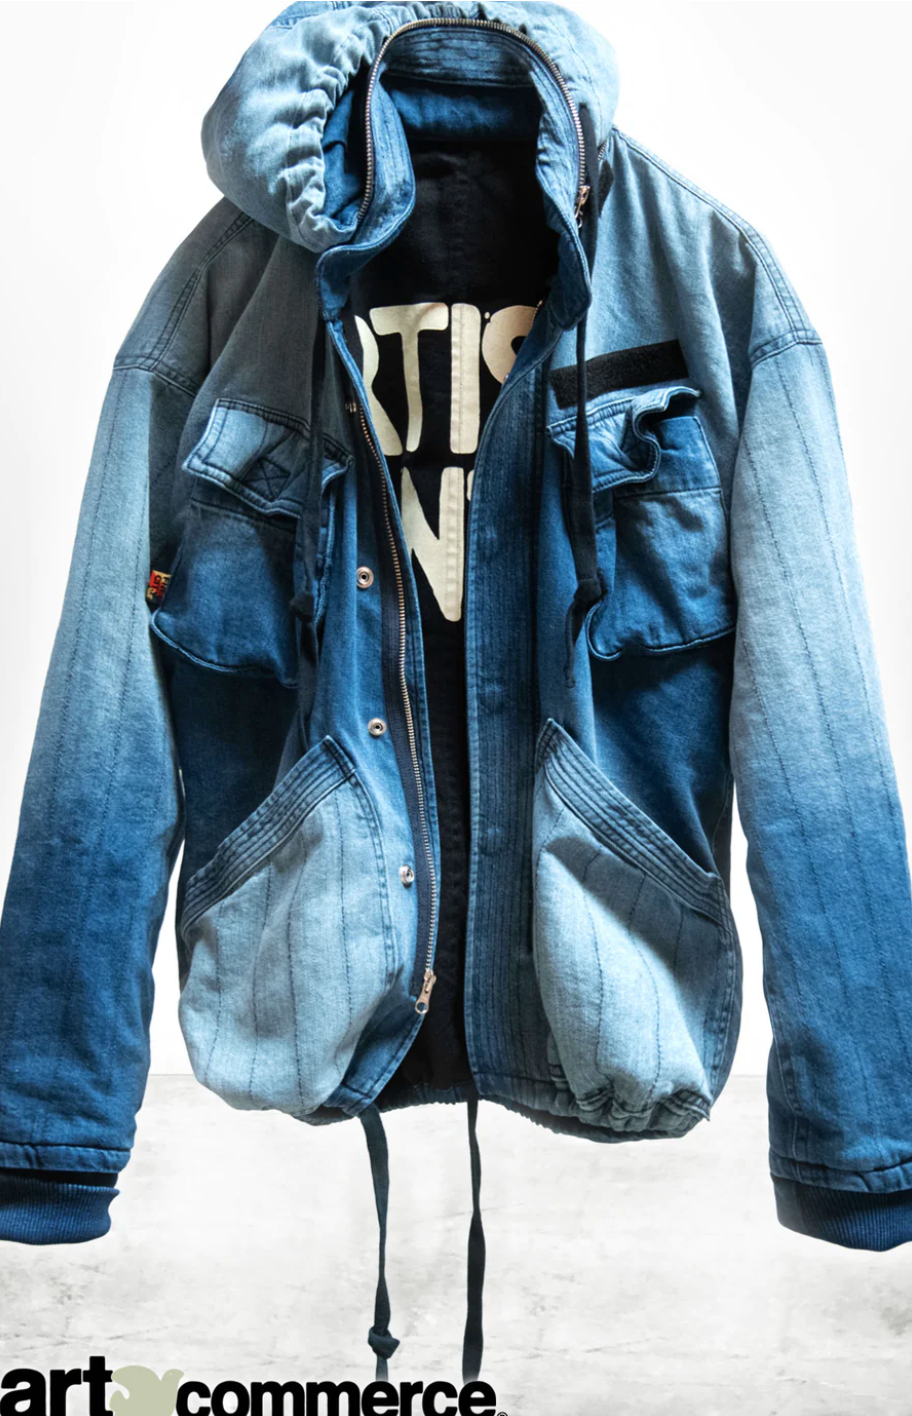 A structured display of a ARTISTSWANTED INDIGO ZIP HOOD jacket with a hood, worn over a black t-shirt with "ART" visible on it, against an Arizona-style background.